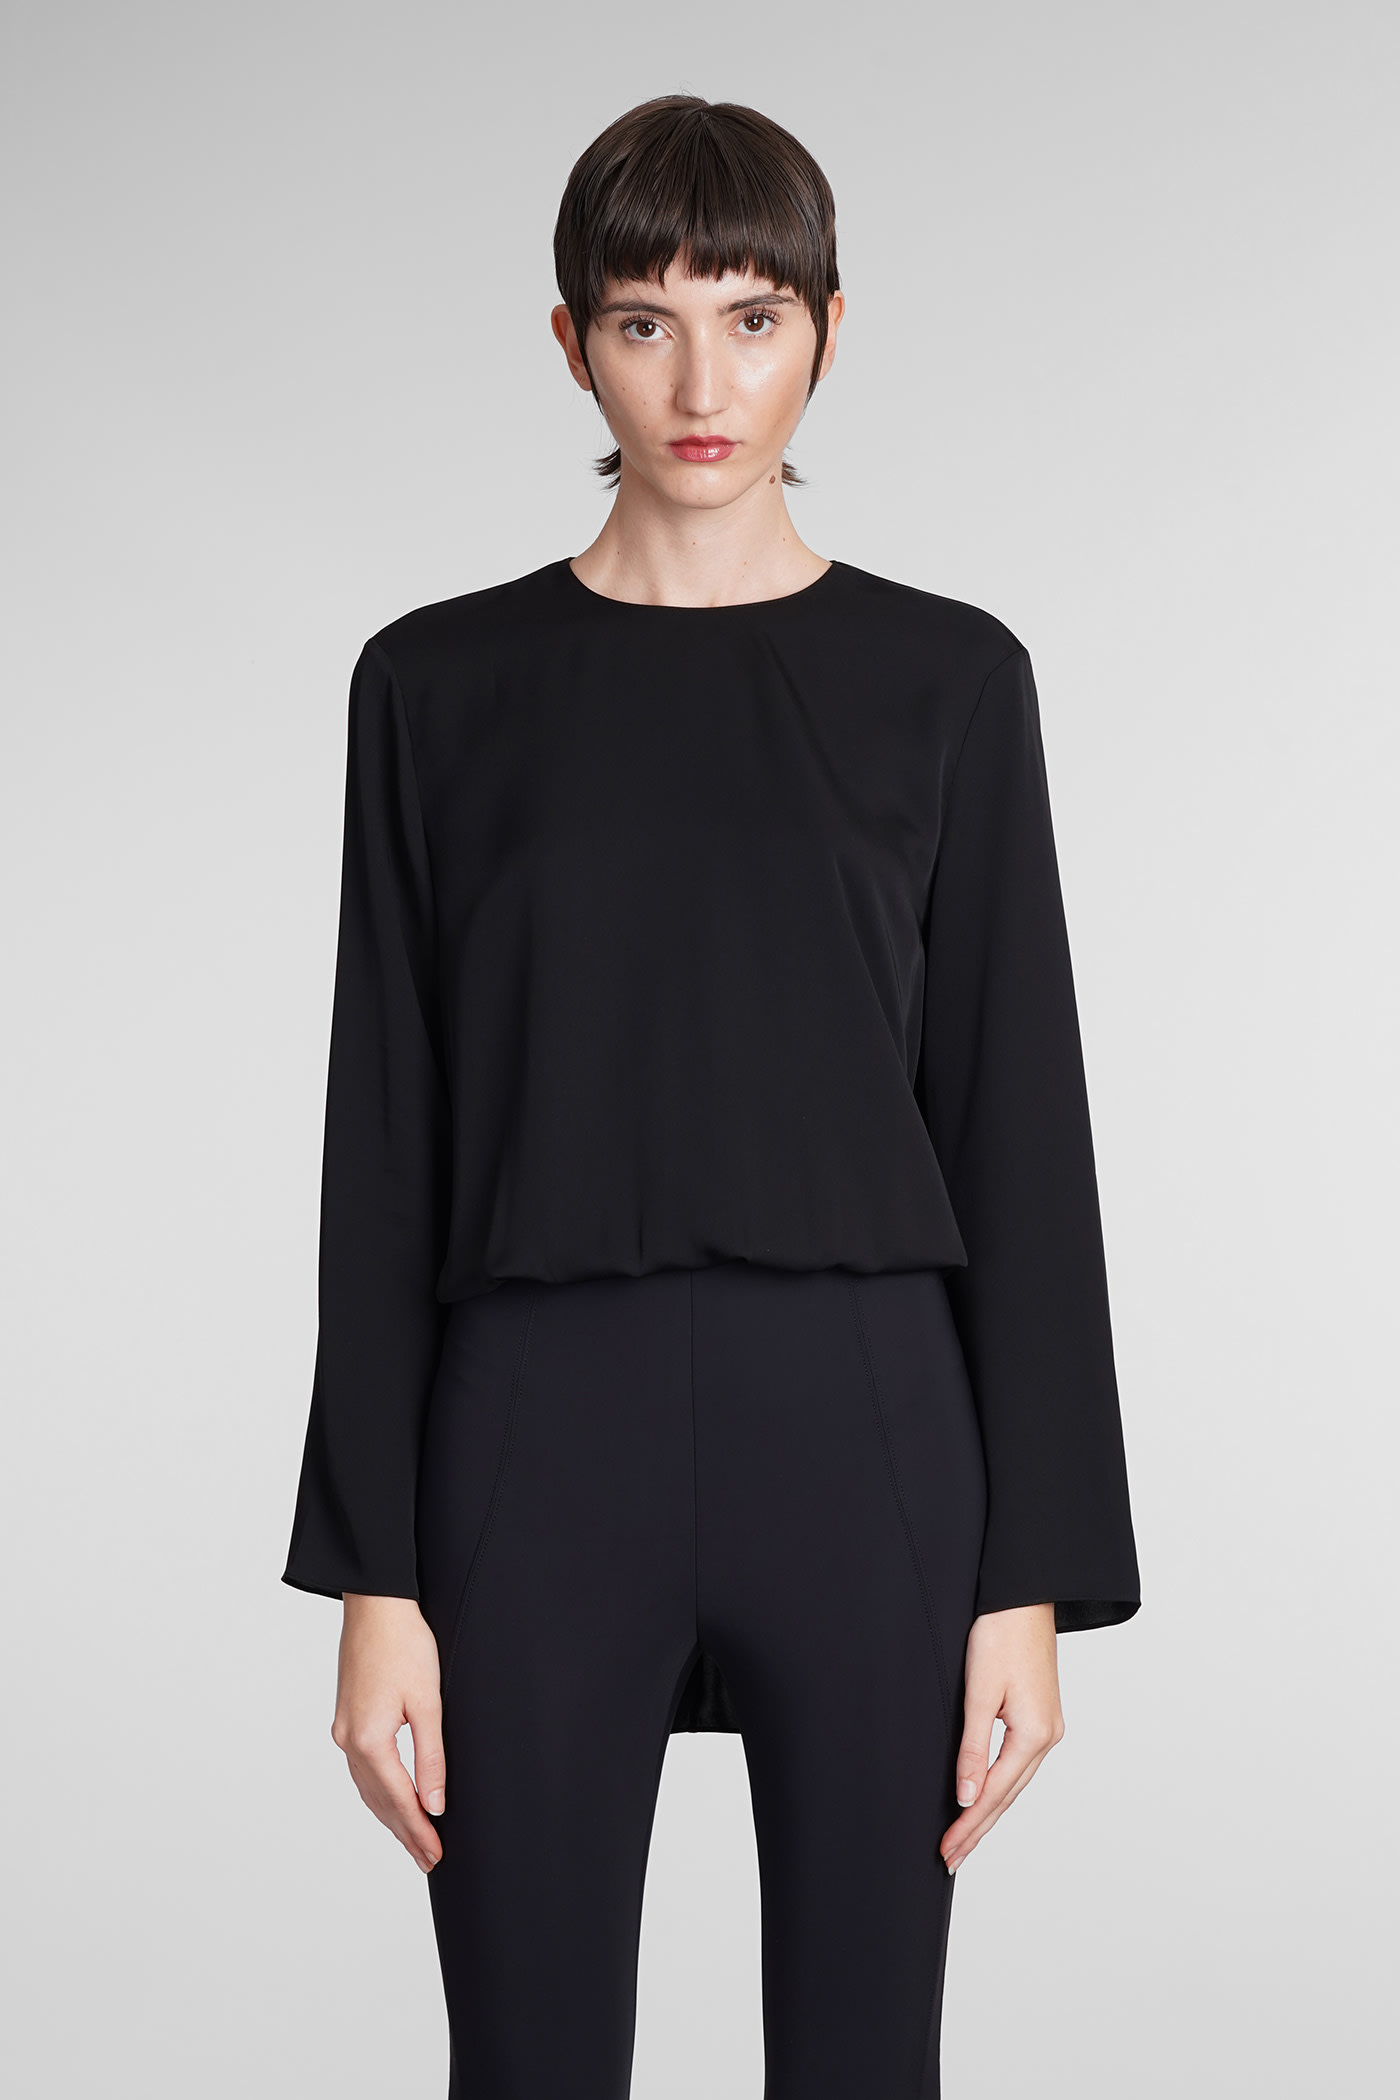 THEORY BLOUSE IN BLACK SILK